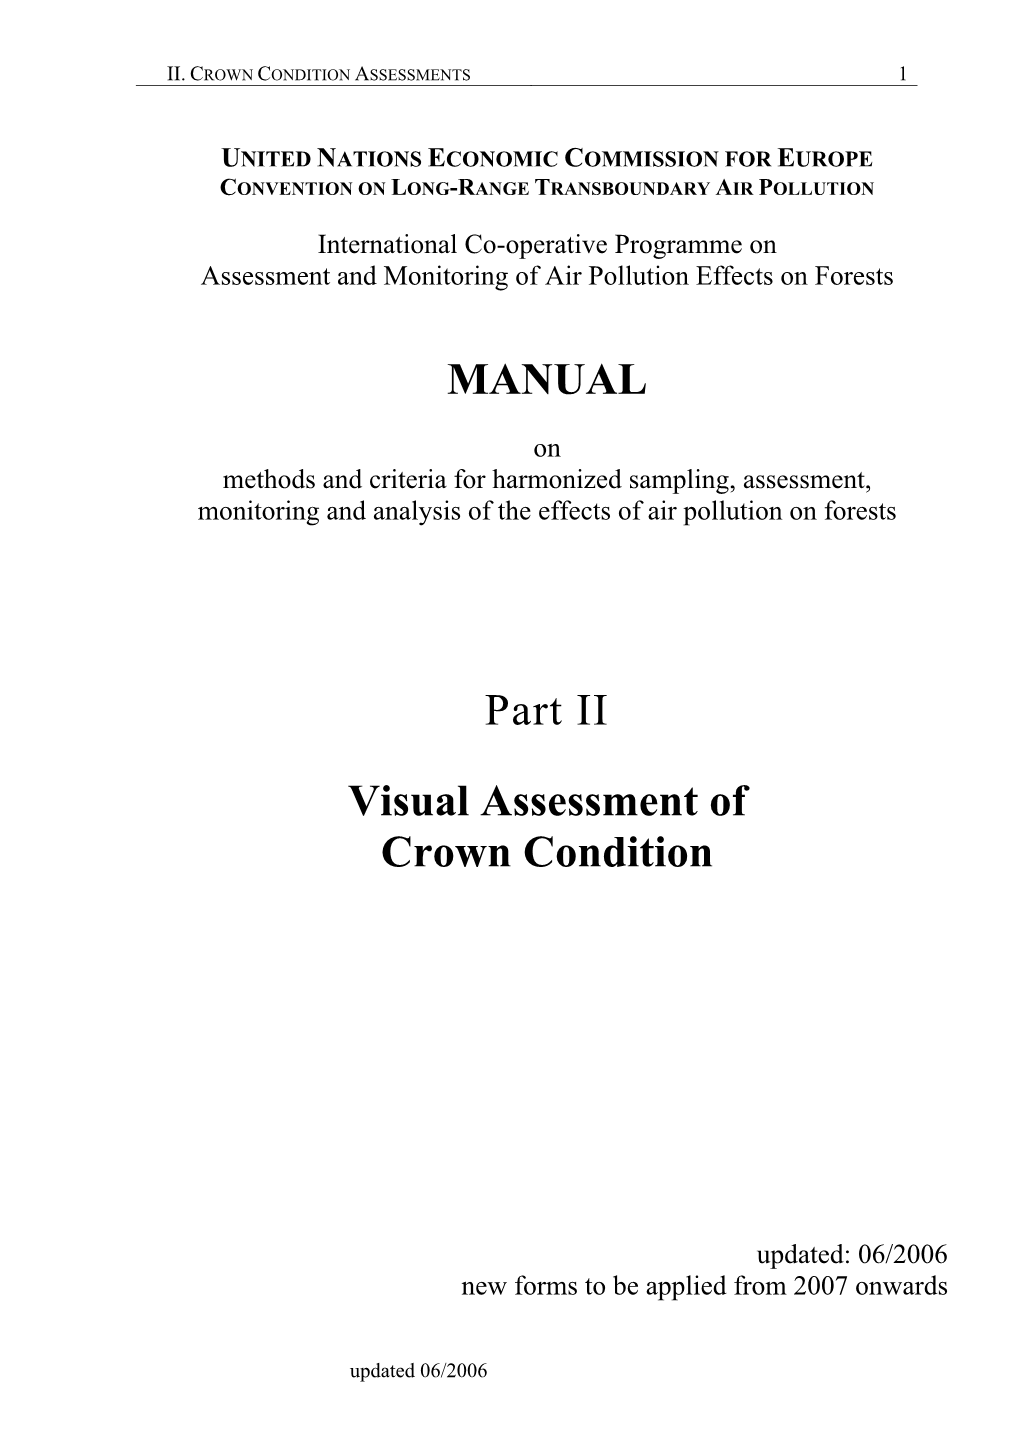 MANUAL Part II Visual Assessment of Crown Condition